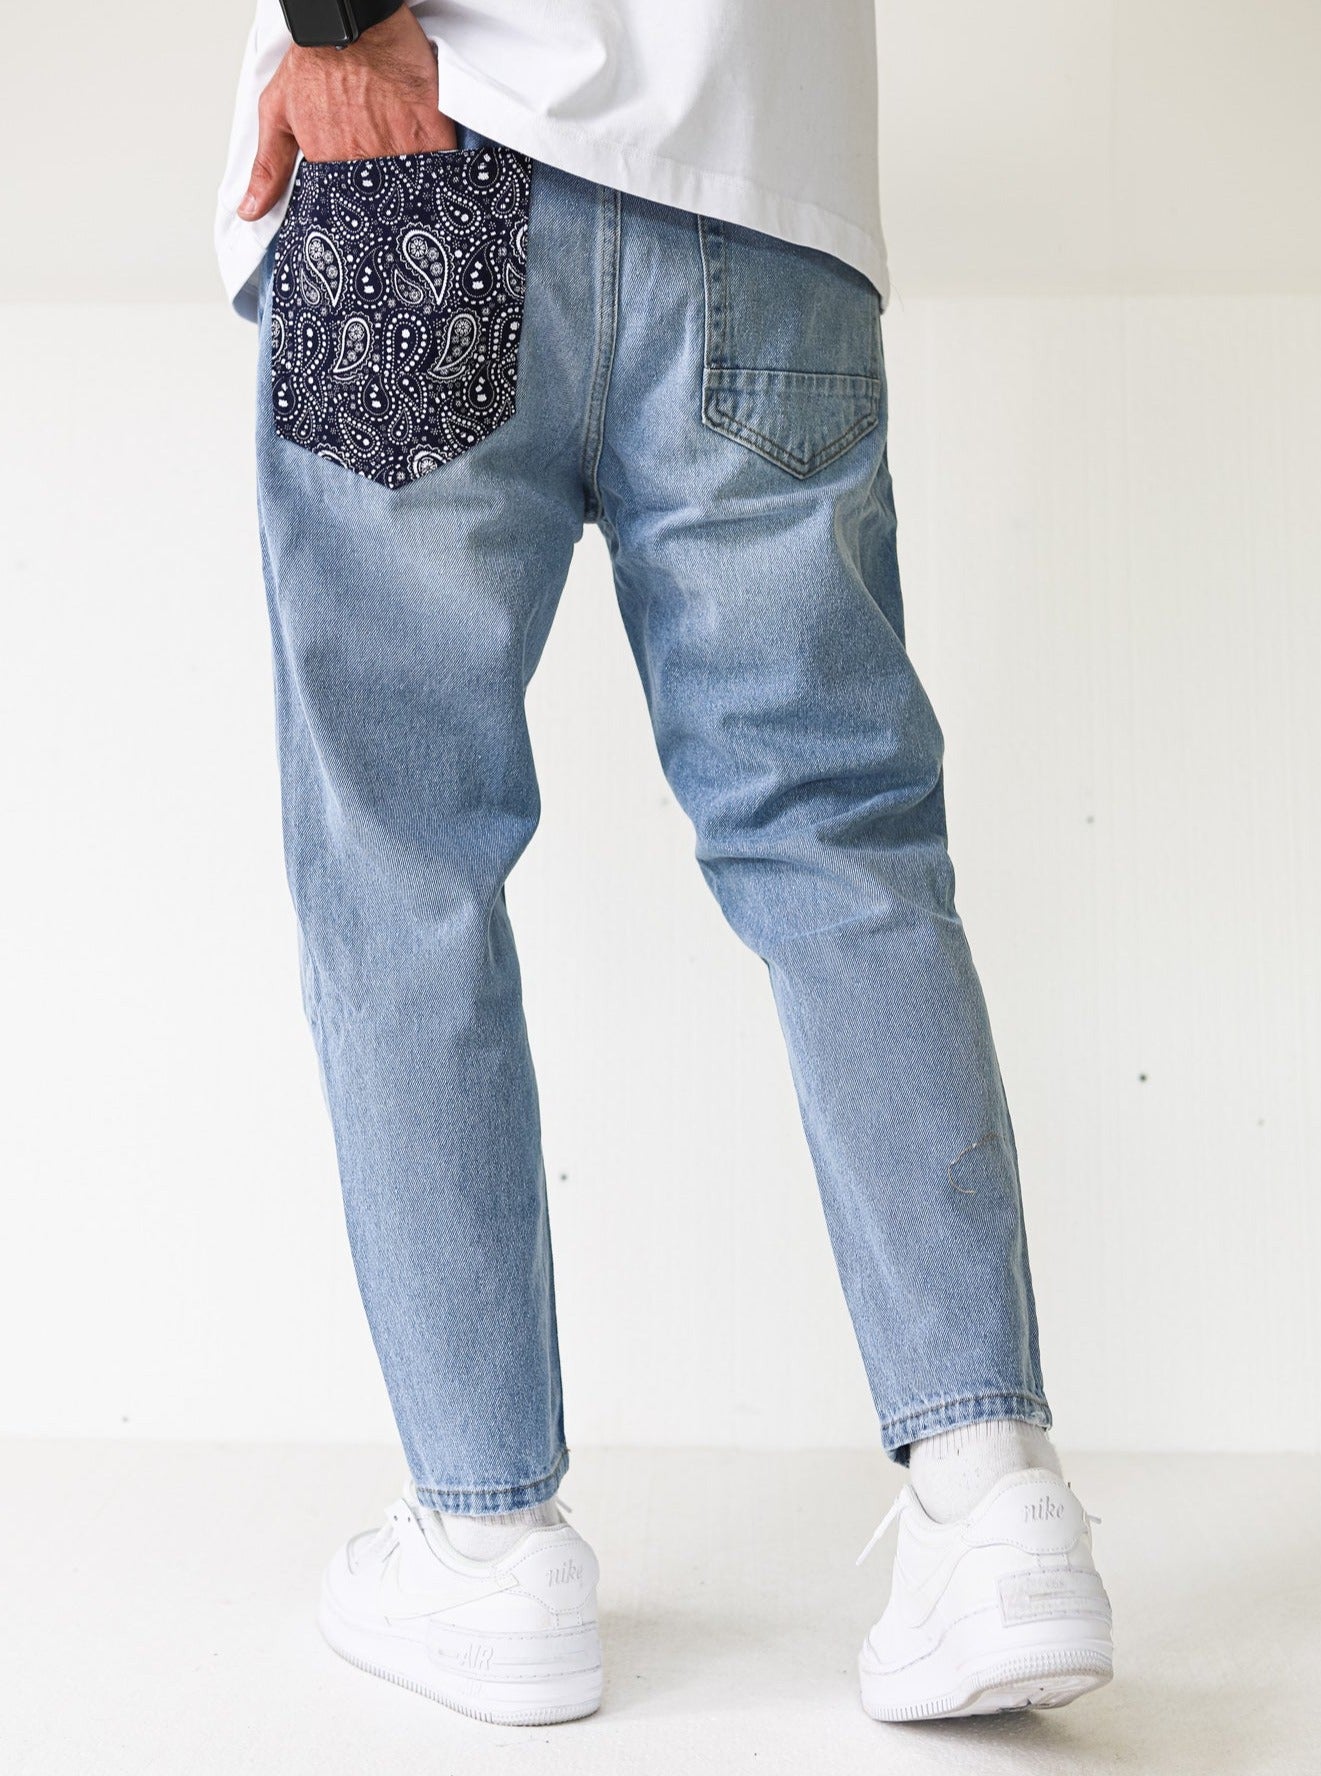 Bandana Relaxed Fit Premium Blue Jeans